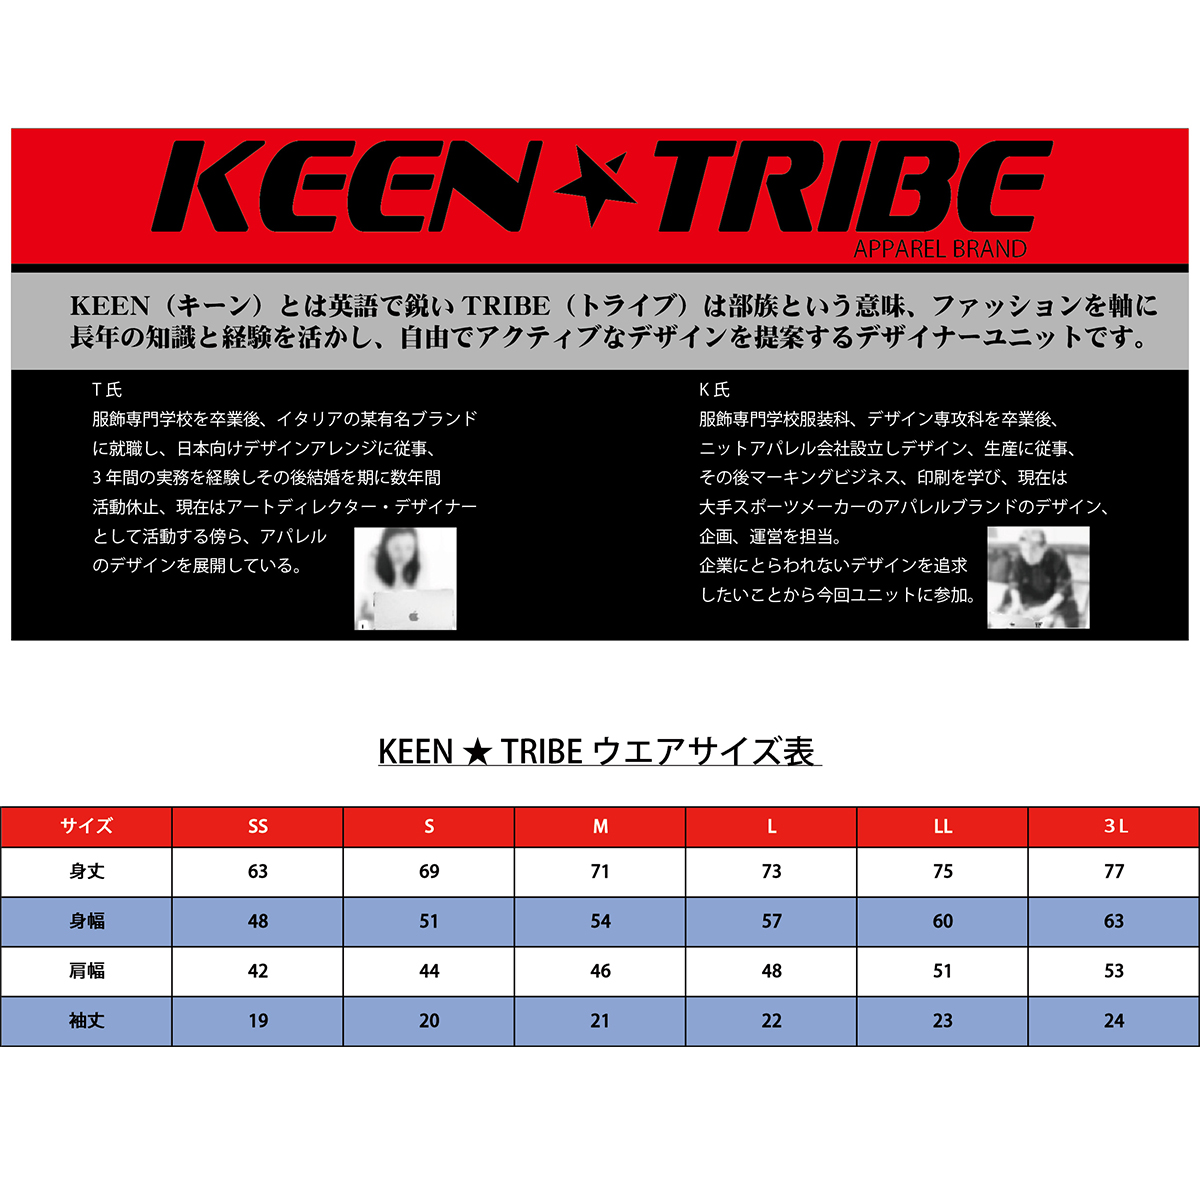 KEEN ★ TRIBE　KT-11(受注生産)